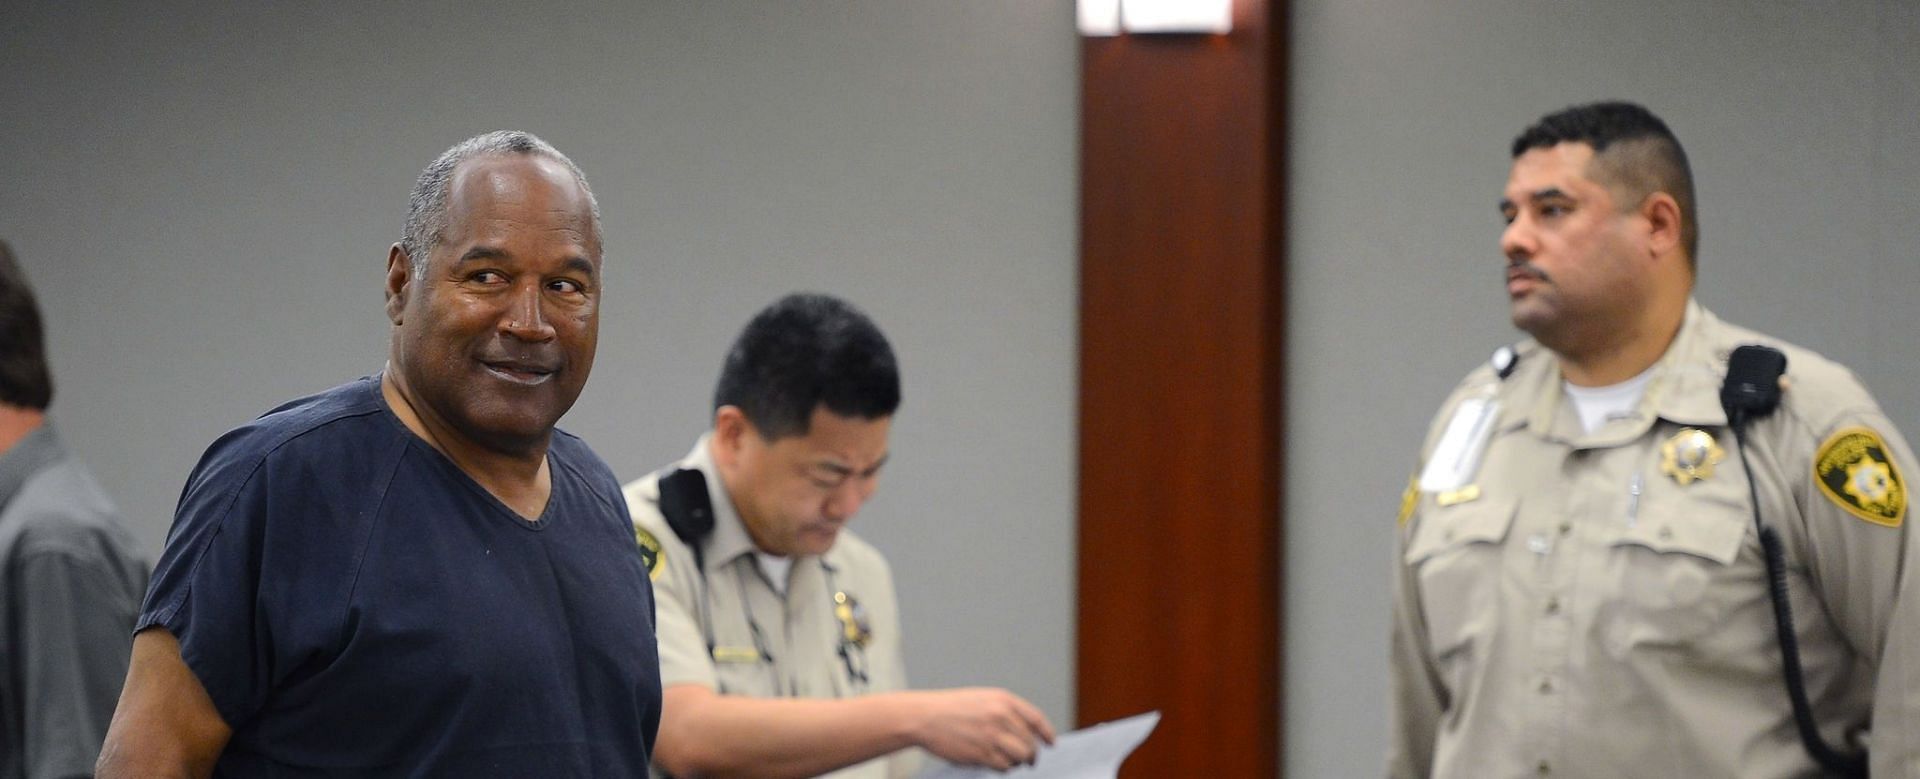 OJ Simpson served nine years in prison for armed robbery in 2007 (Image via Ethan Miller/Getty Images)